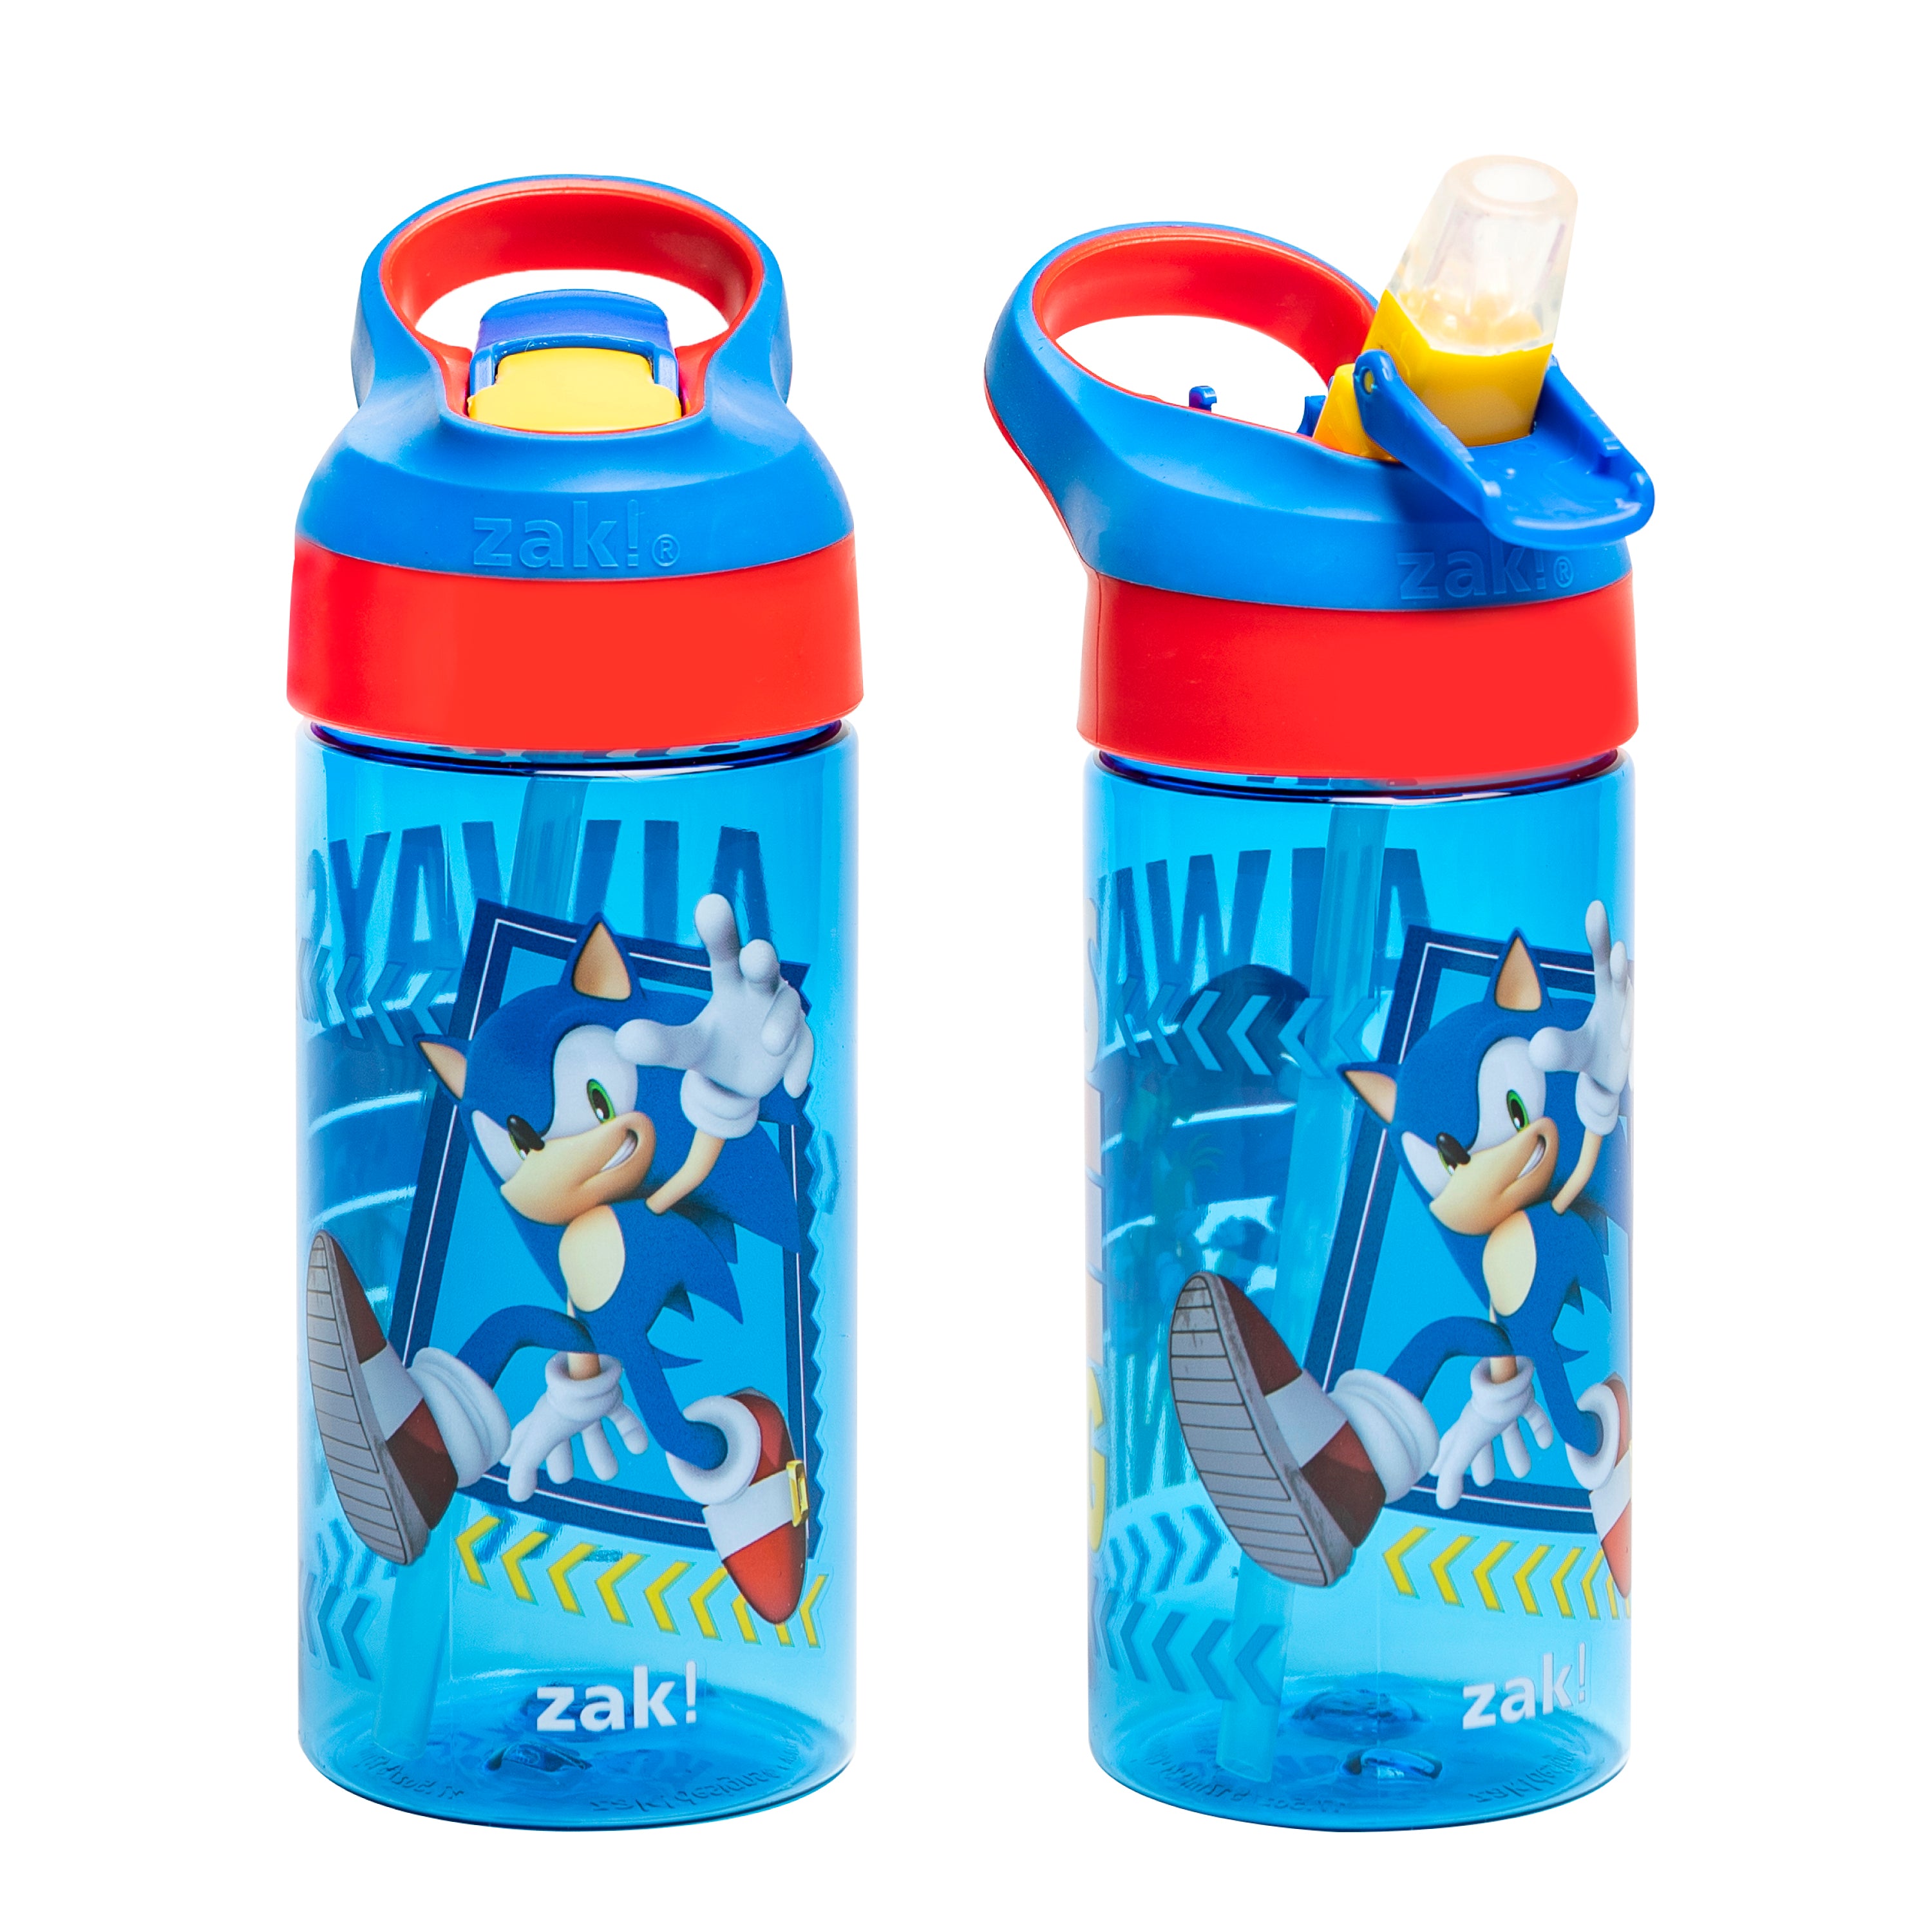 Sonic the Hedgehog Kids Leak Proof Water Bottle with Push Button Lid and Spout